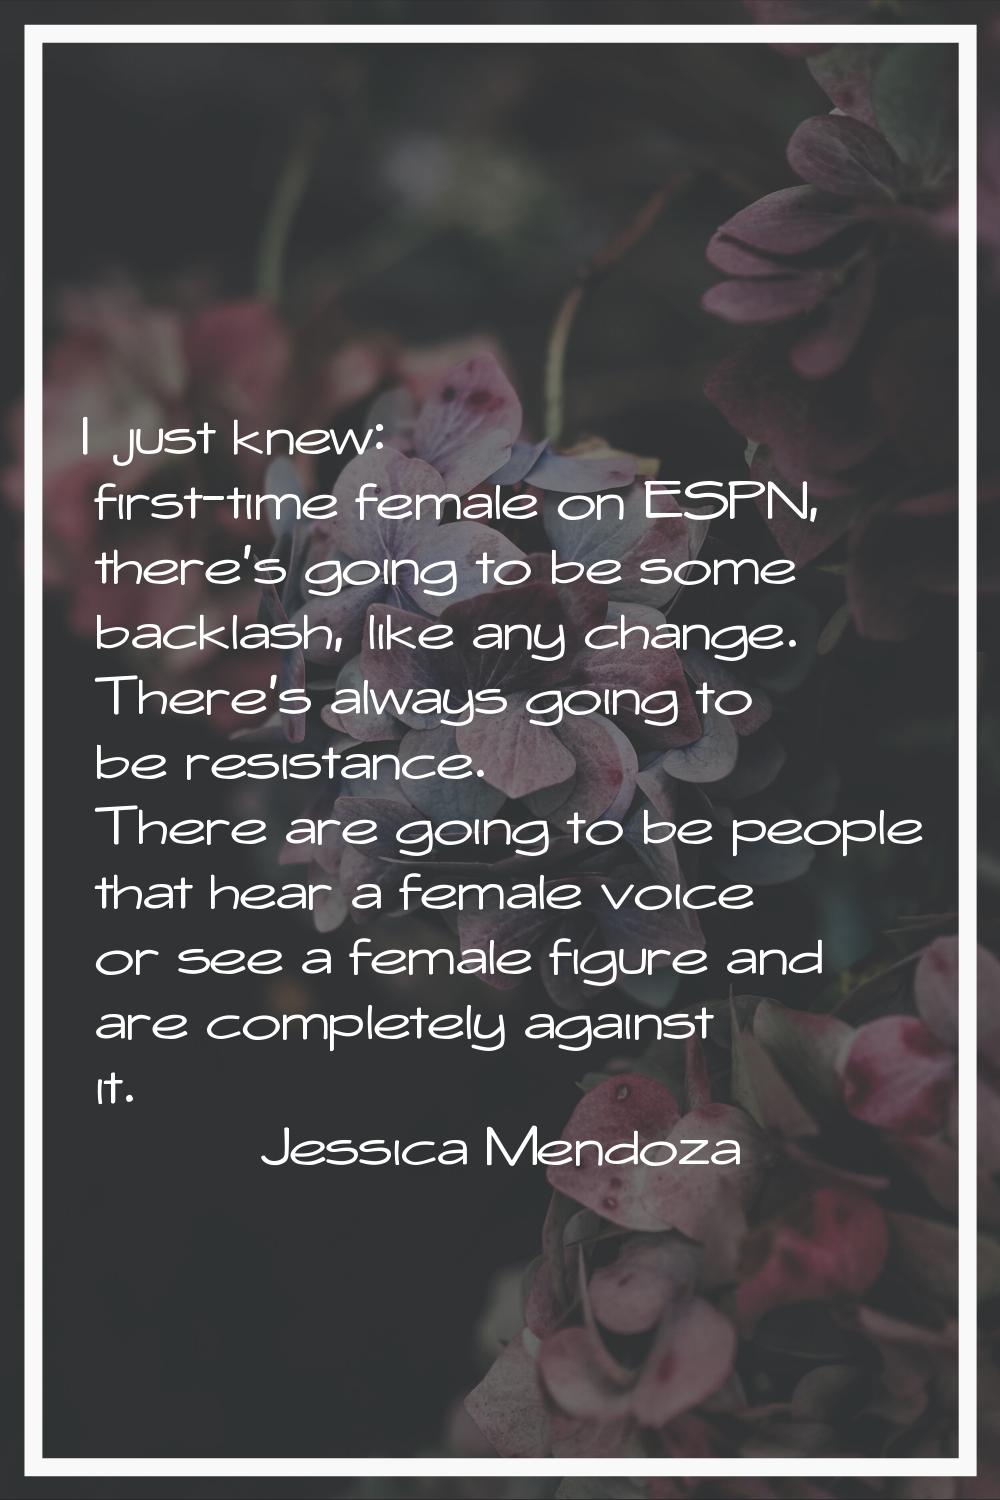 I just knew: first-time female on ESPN, there's going to be some backlash, like any change. There's